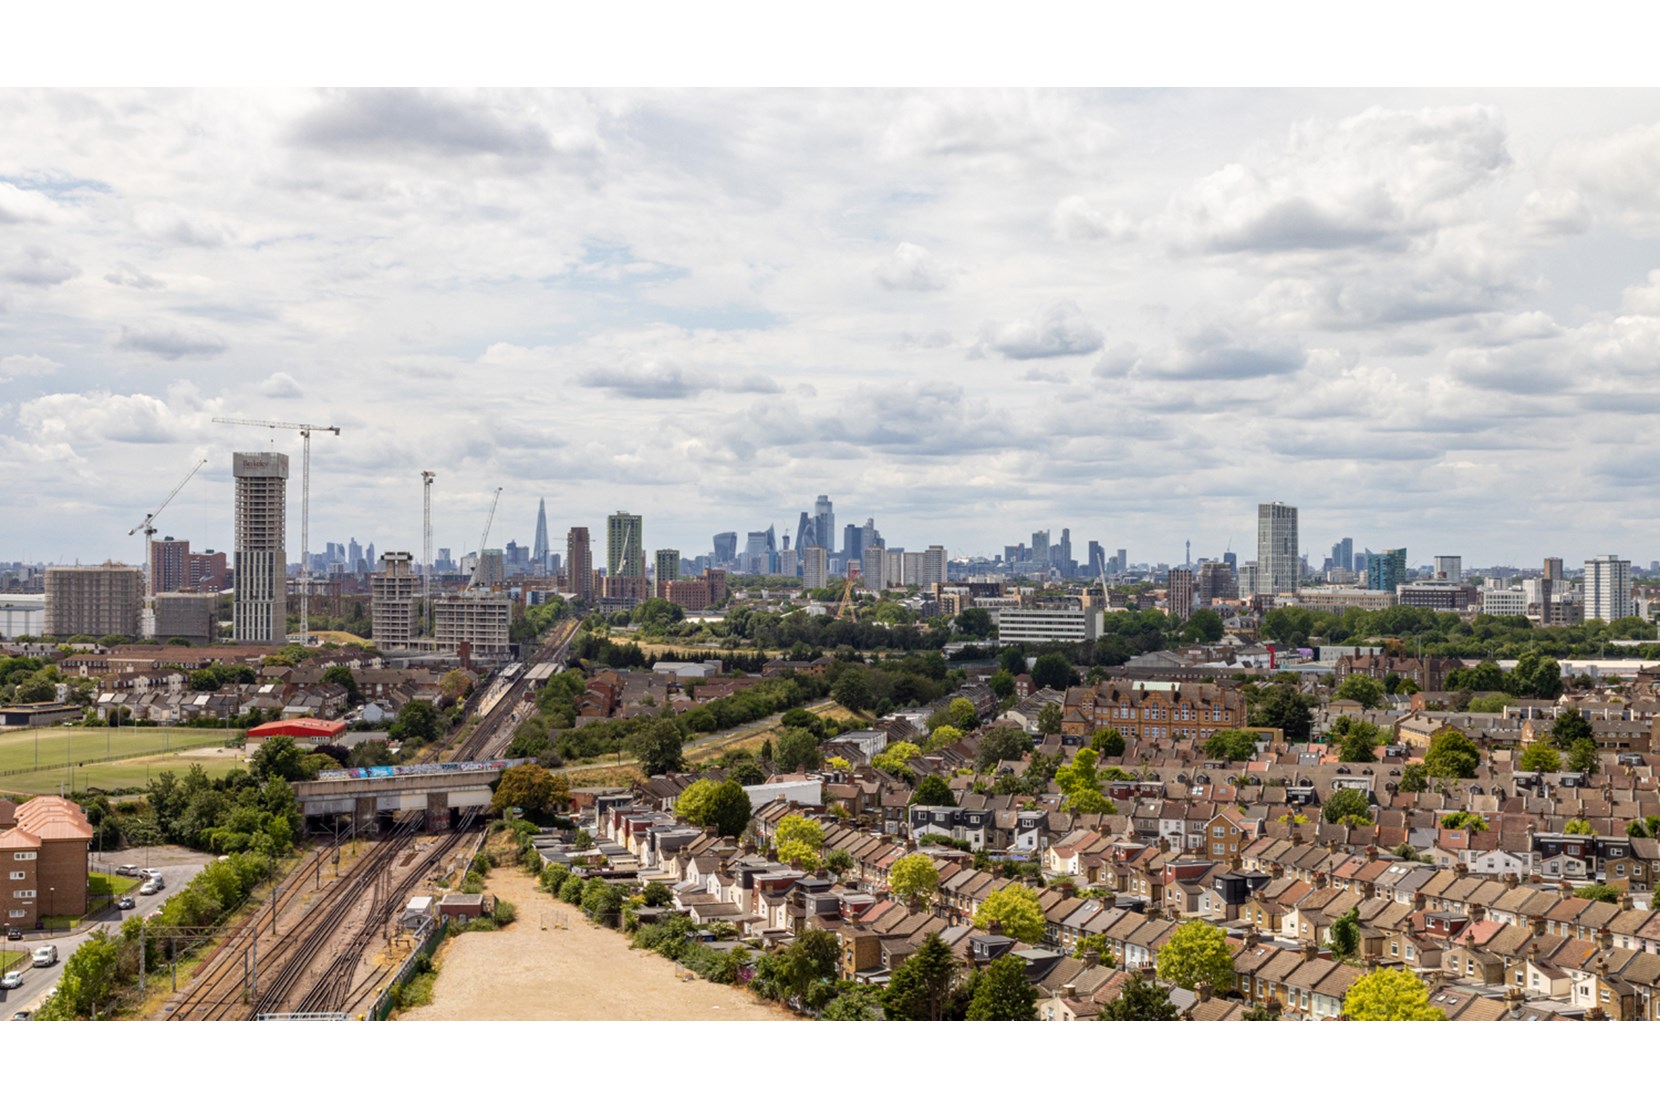 Apartments to Rent by Populo Living at Plaistow Hub, Newham, E13, 13th floor panoramic view